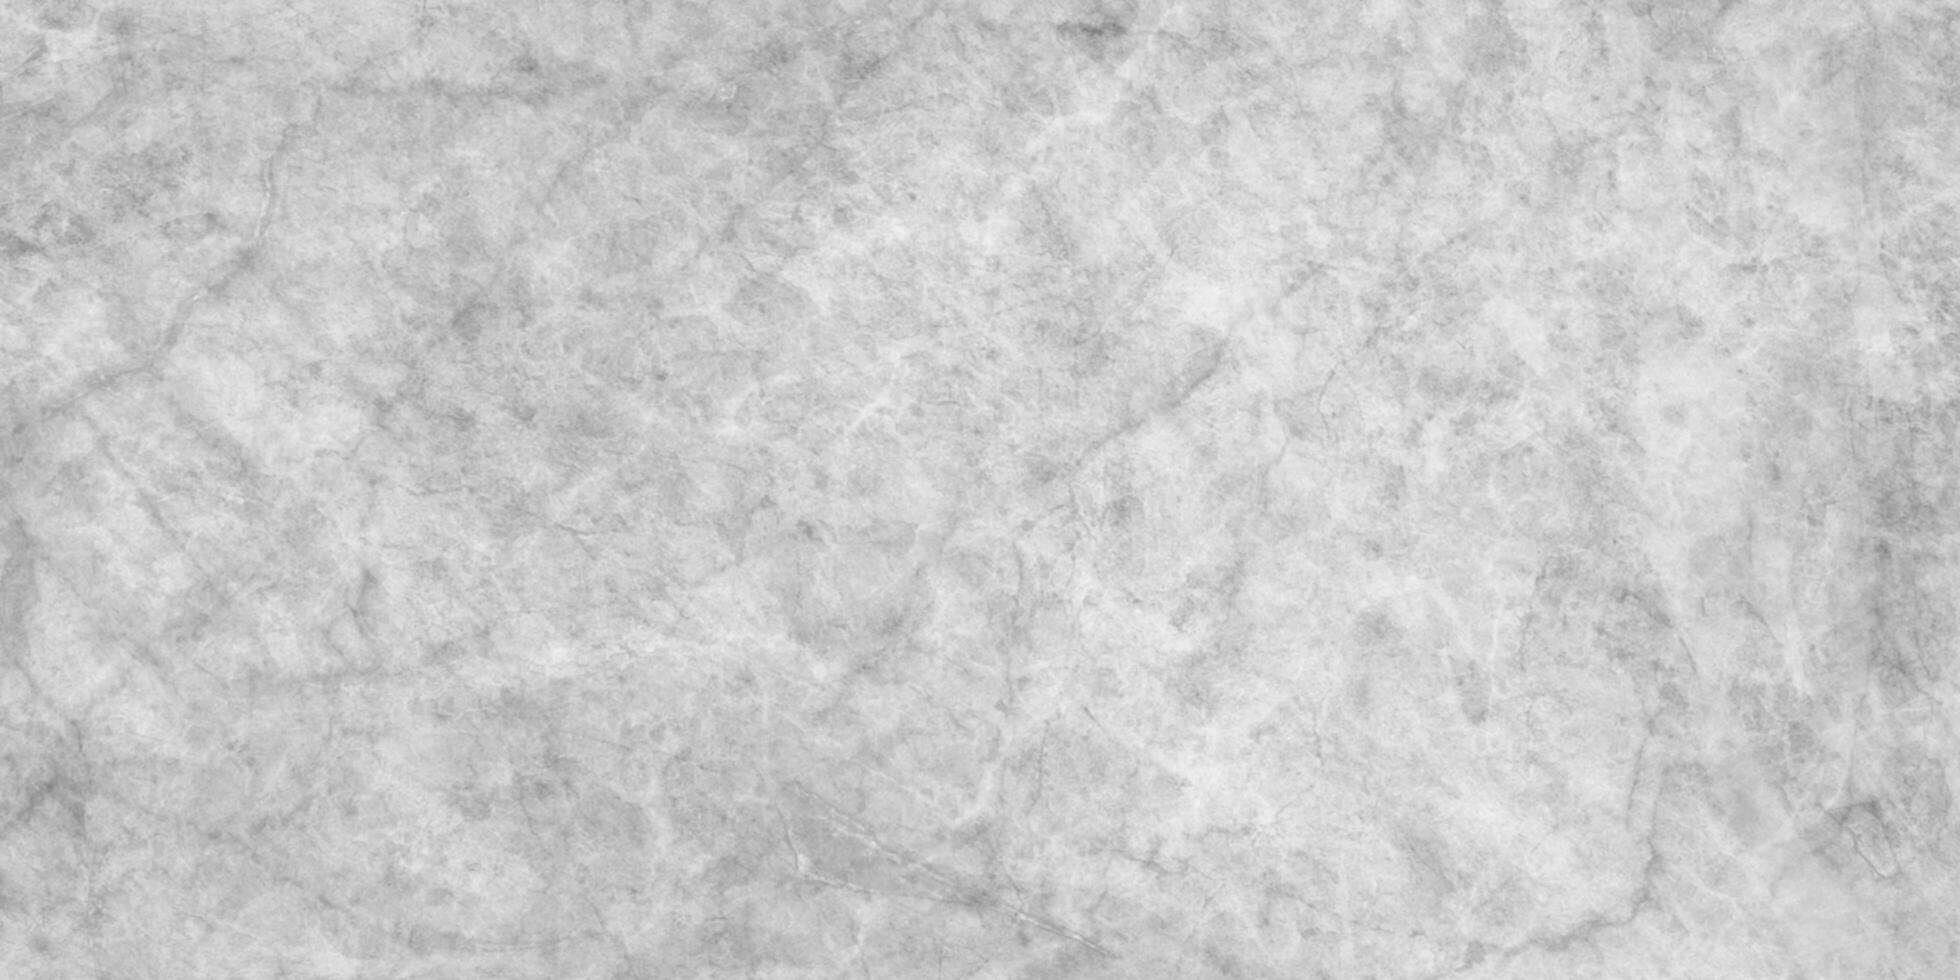 old and grunge marble stone texture, abstract grey shades grunge texture, polished marble texture perfect for wall, kitchen, floor and bathroom decoration. photo